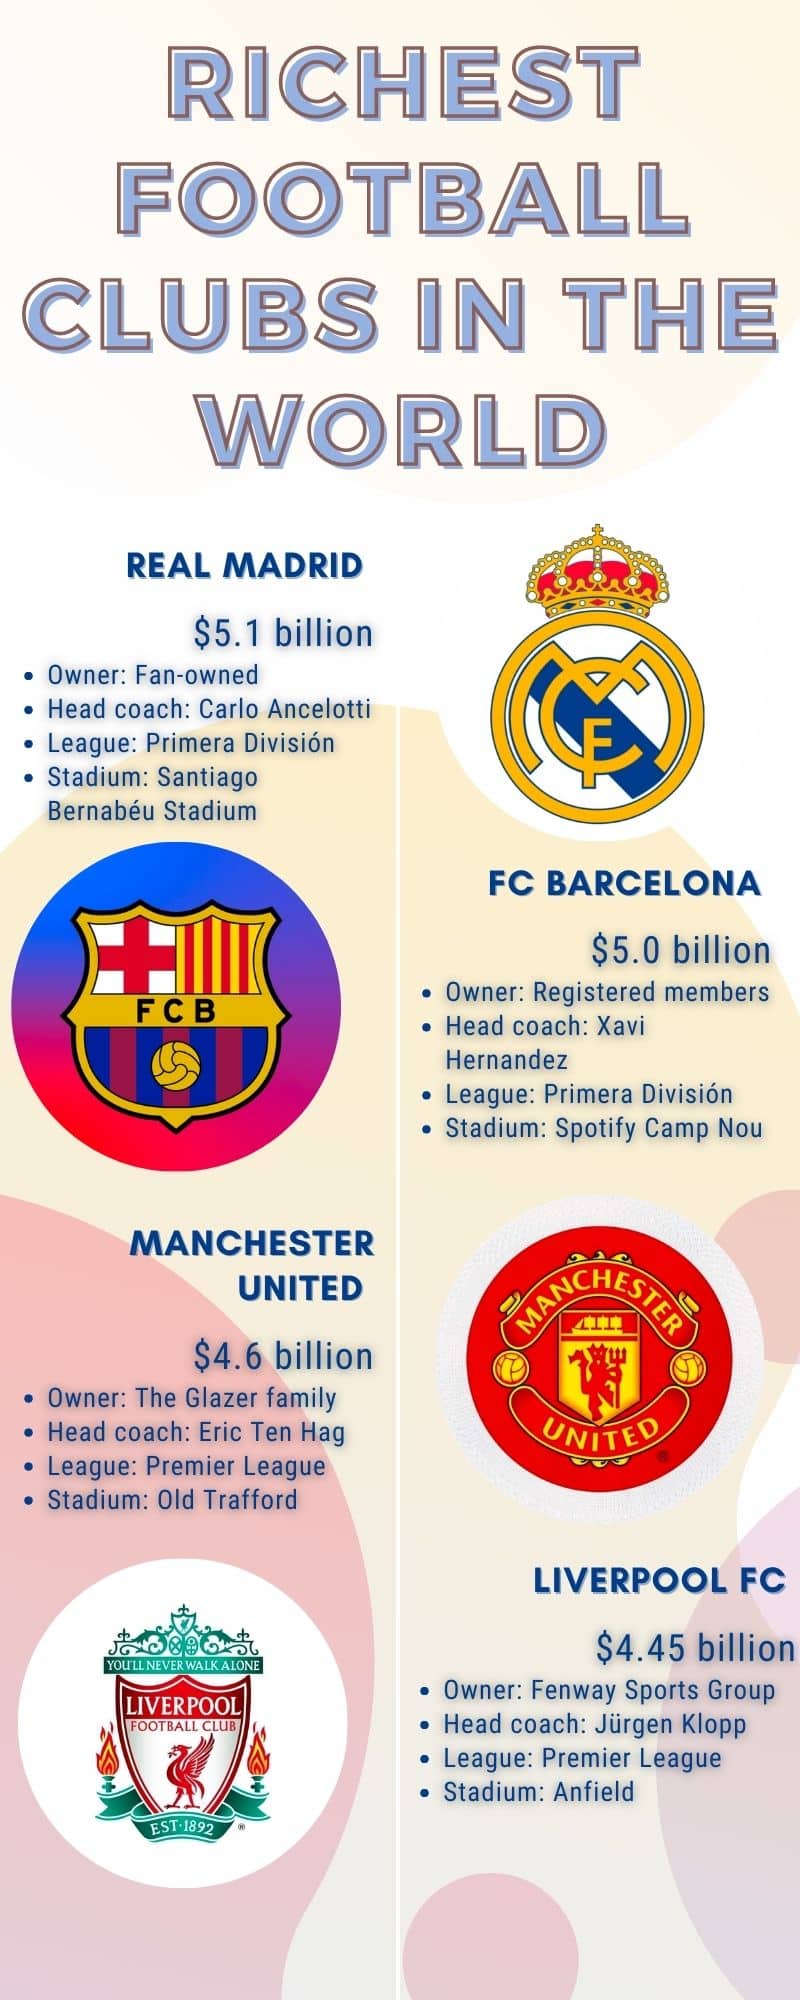 Richest football clubs in the world